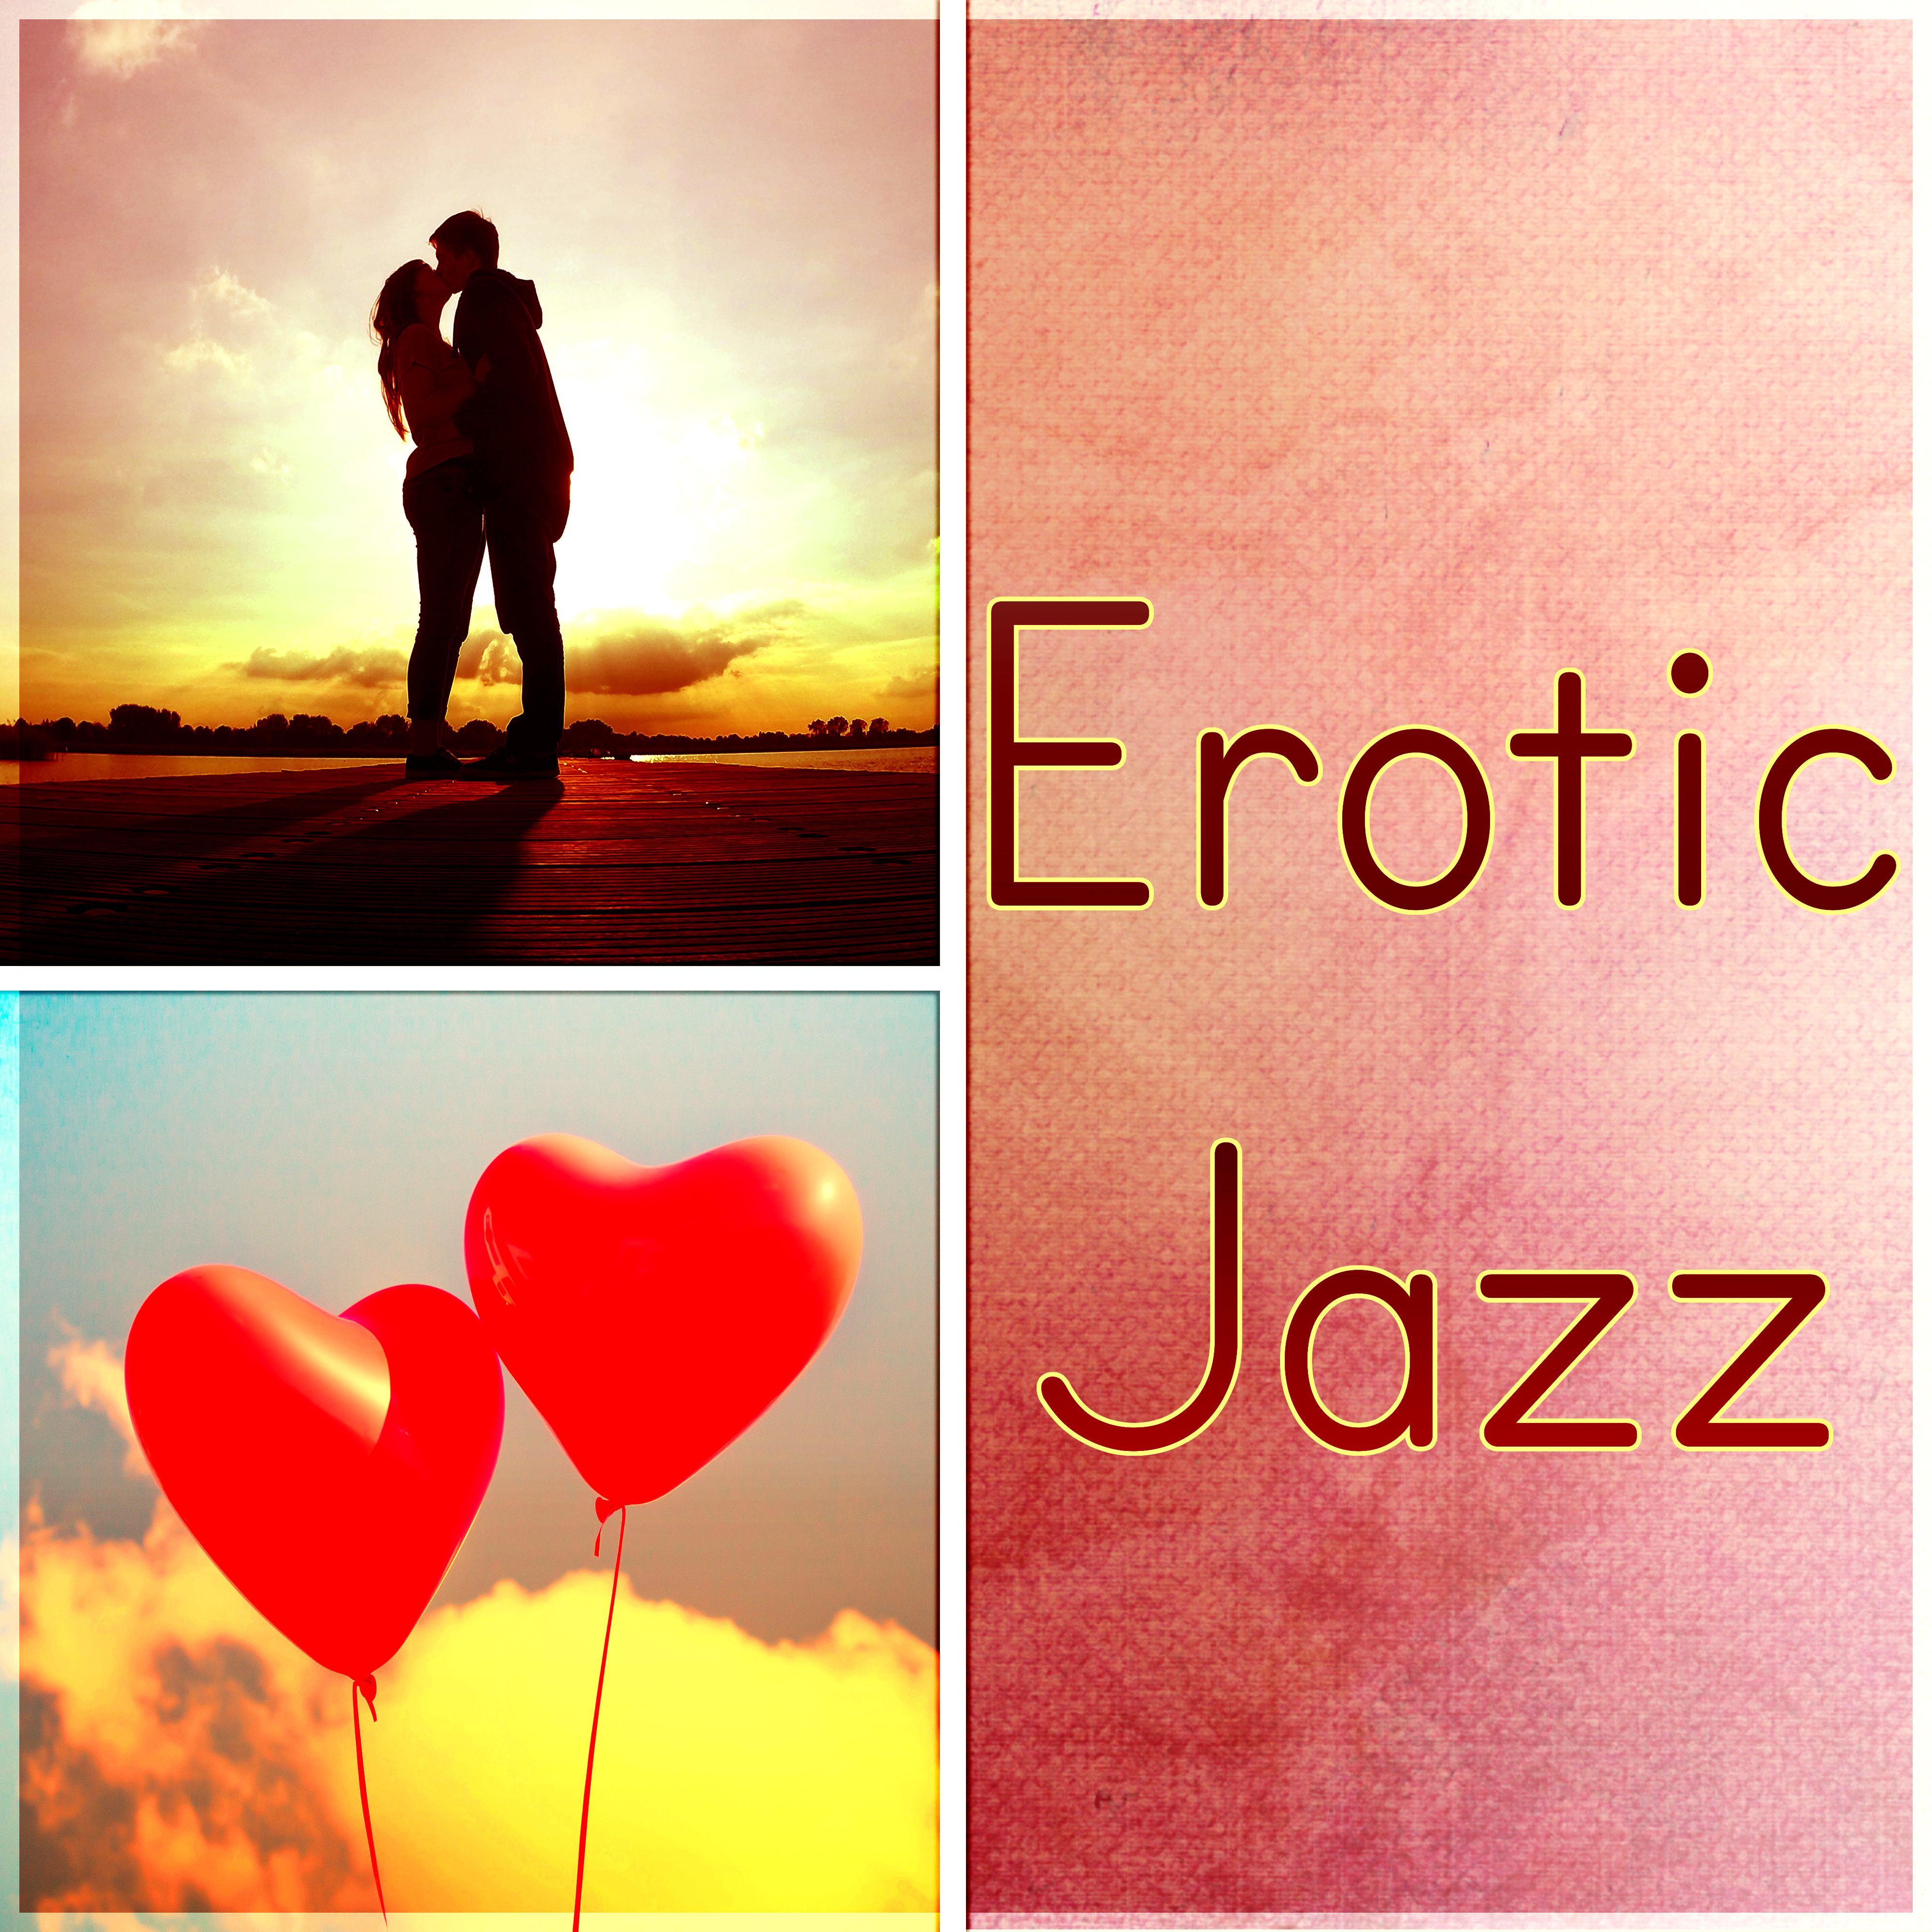 Erotic Jazz  Jazz Guitar Music, Romantic Dinner Party, Instrumental Songs, Background Guitar Chill Sounds, Smooth Jazz Ambient Music,  Music, French Love